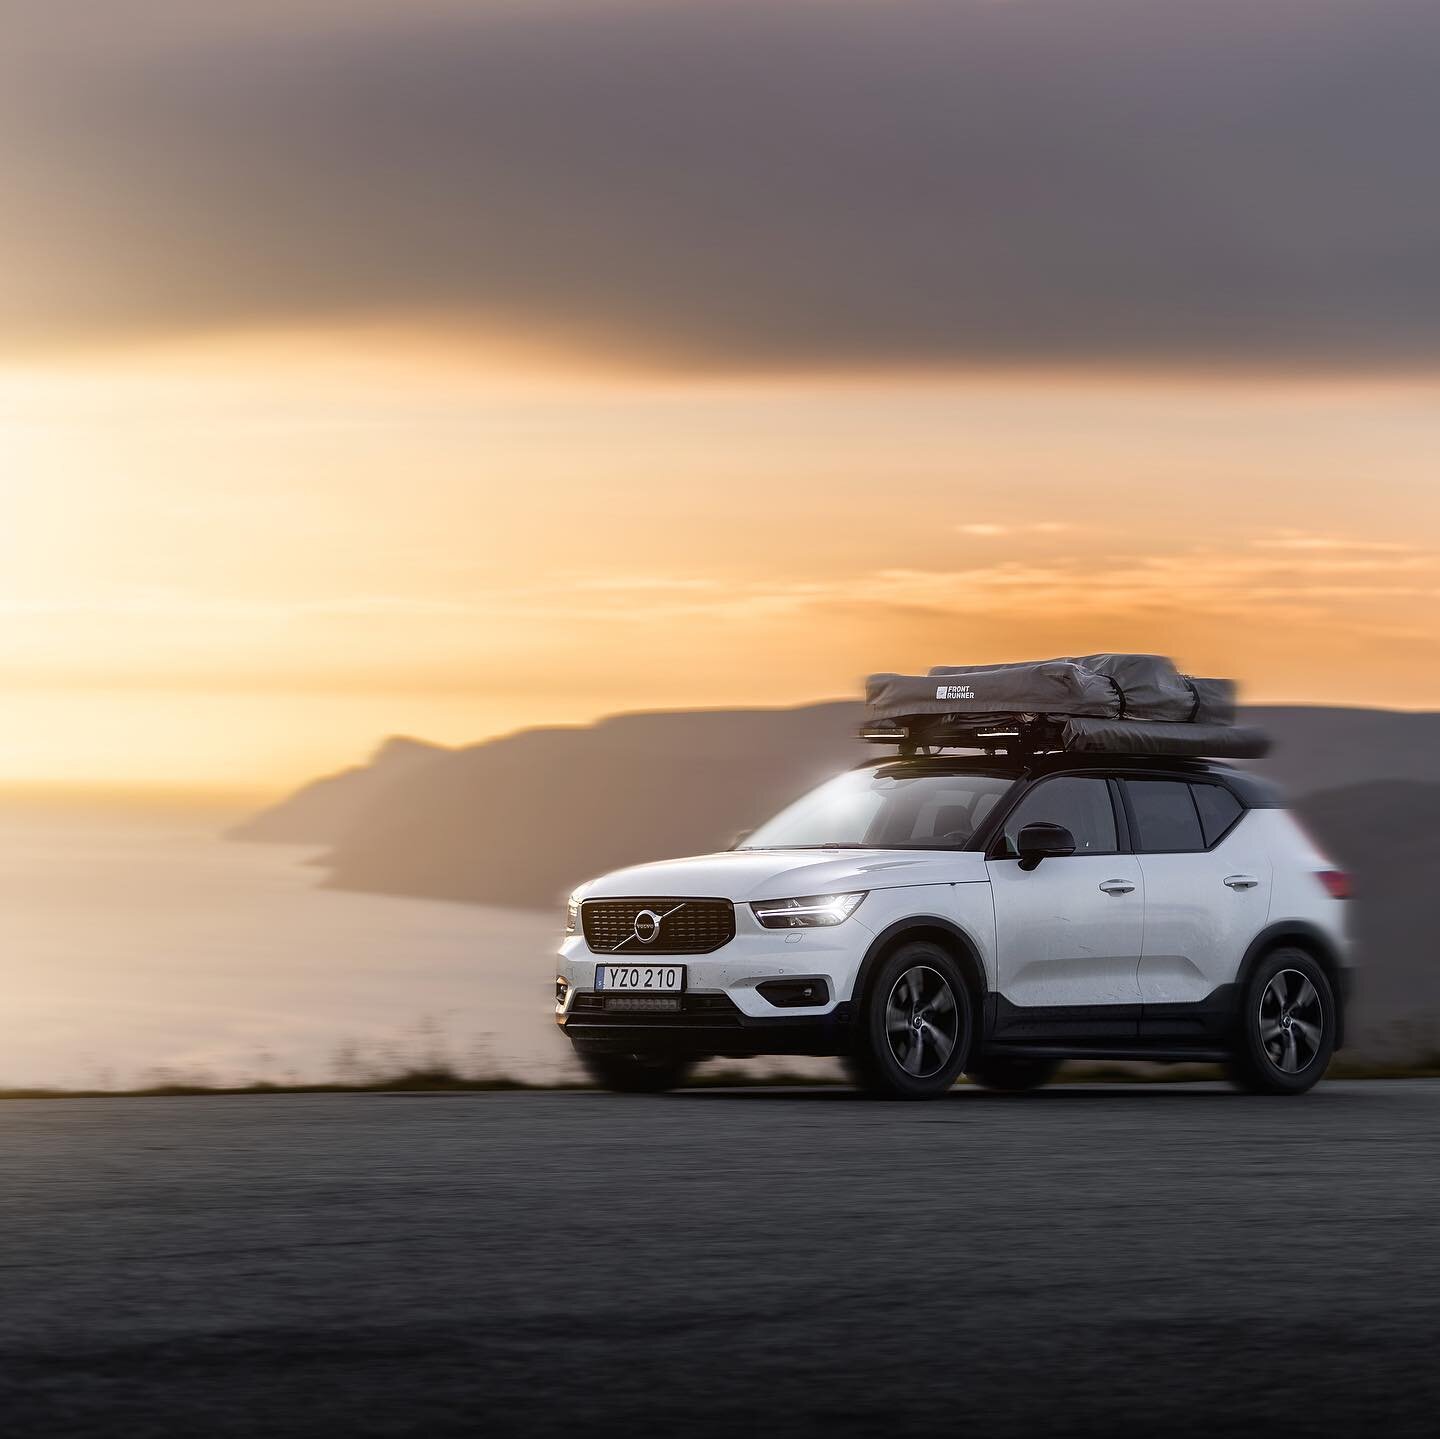 Made by @volvocars, enhanced by @frontrunnereuro ✌️ Summer ☀️ and Winter ❄️

As the last snow is melting, I will soon switch the skis for the rooftop tent again. Can&rsquo;t wait to go camping again 🏕️ 

#frontrunneroutfitters #findanywhere #borntor